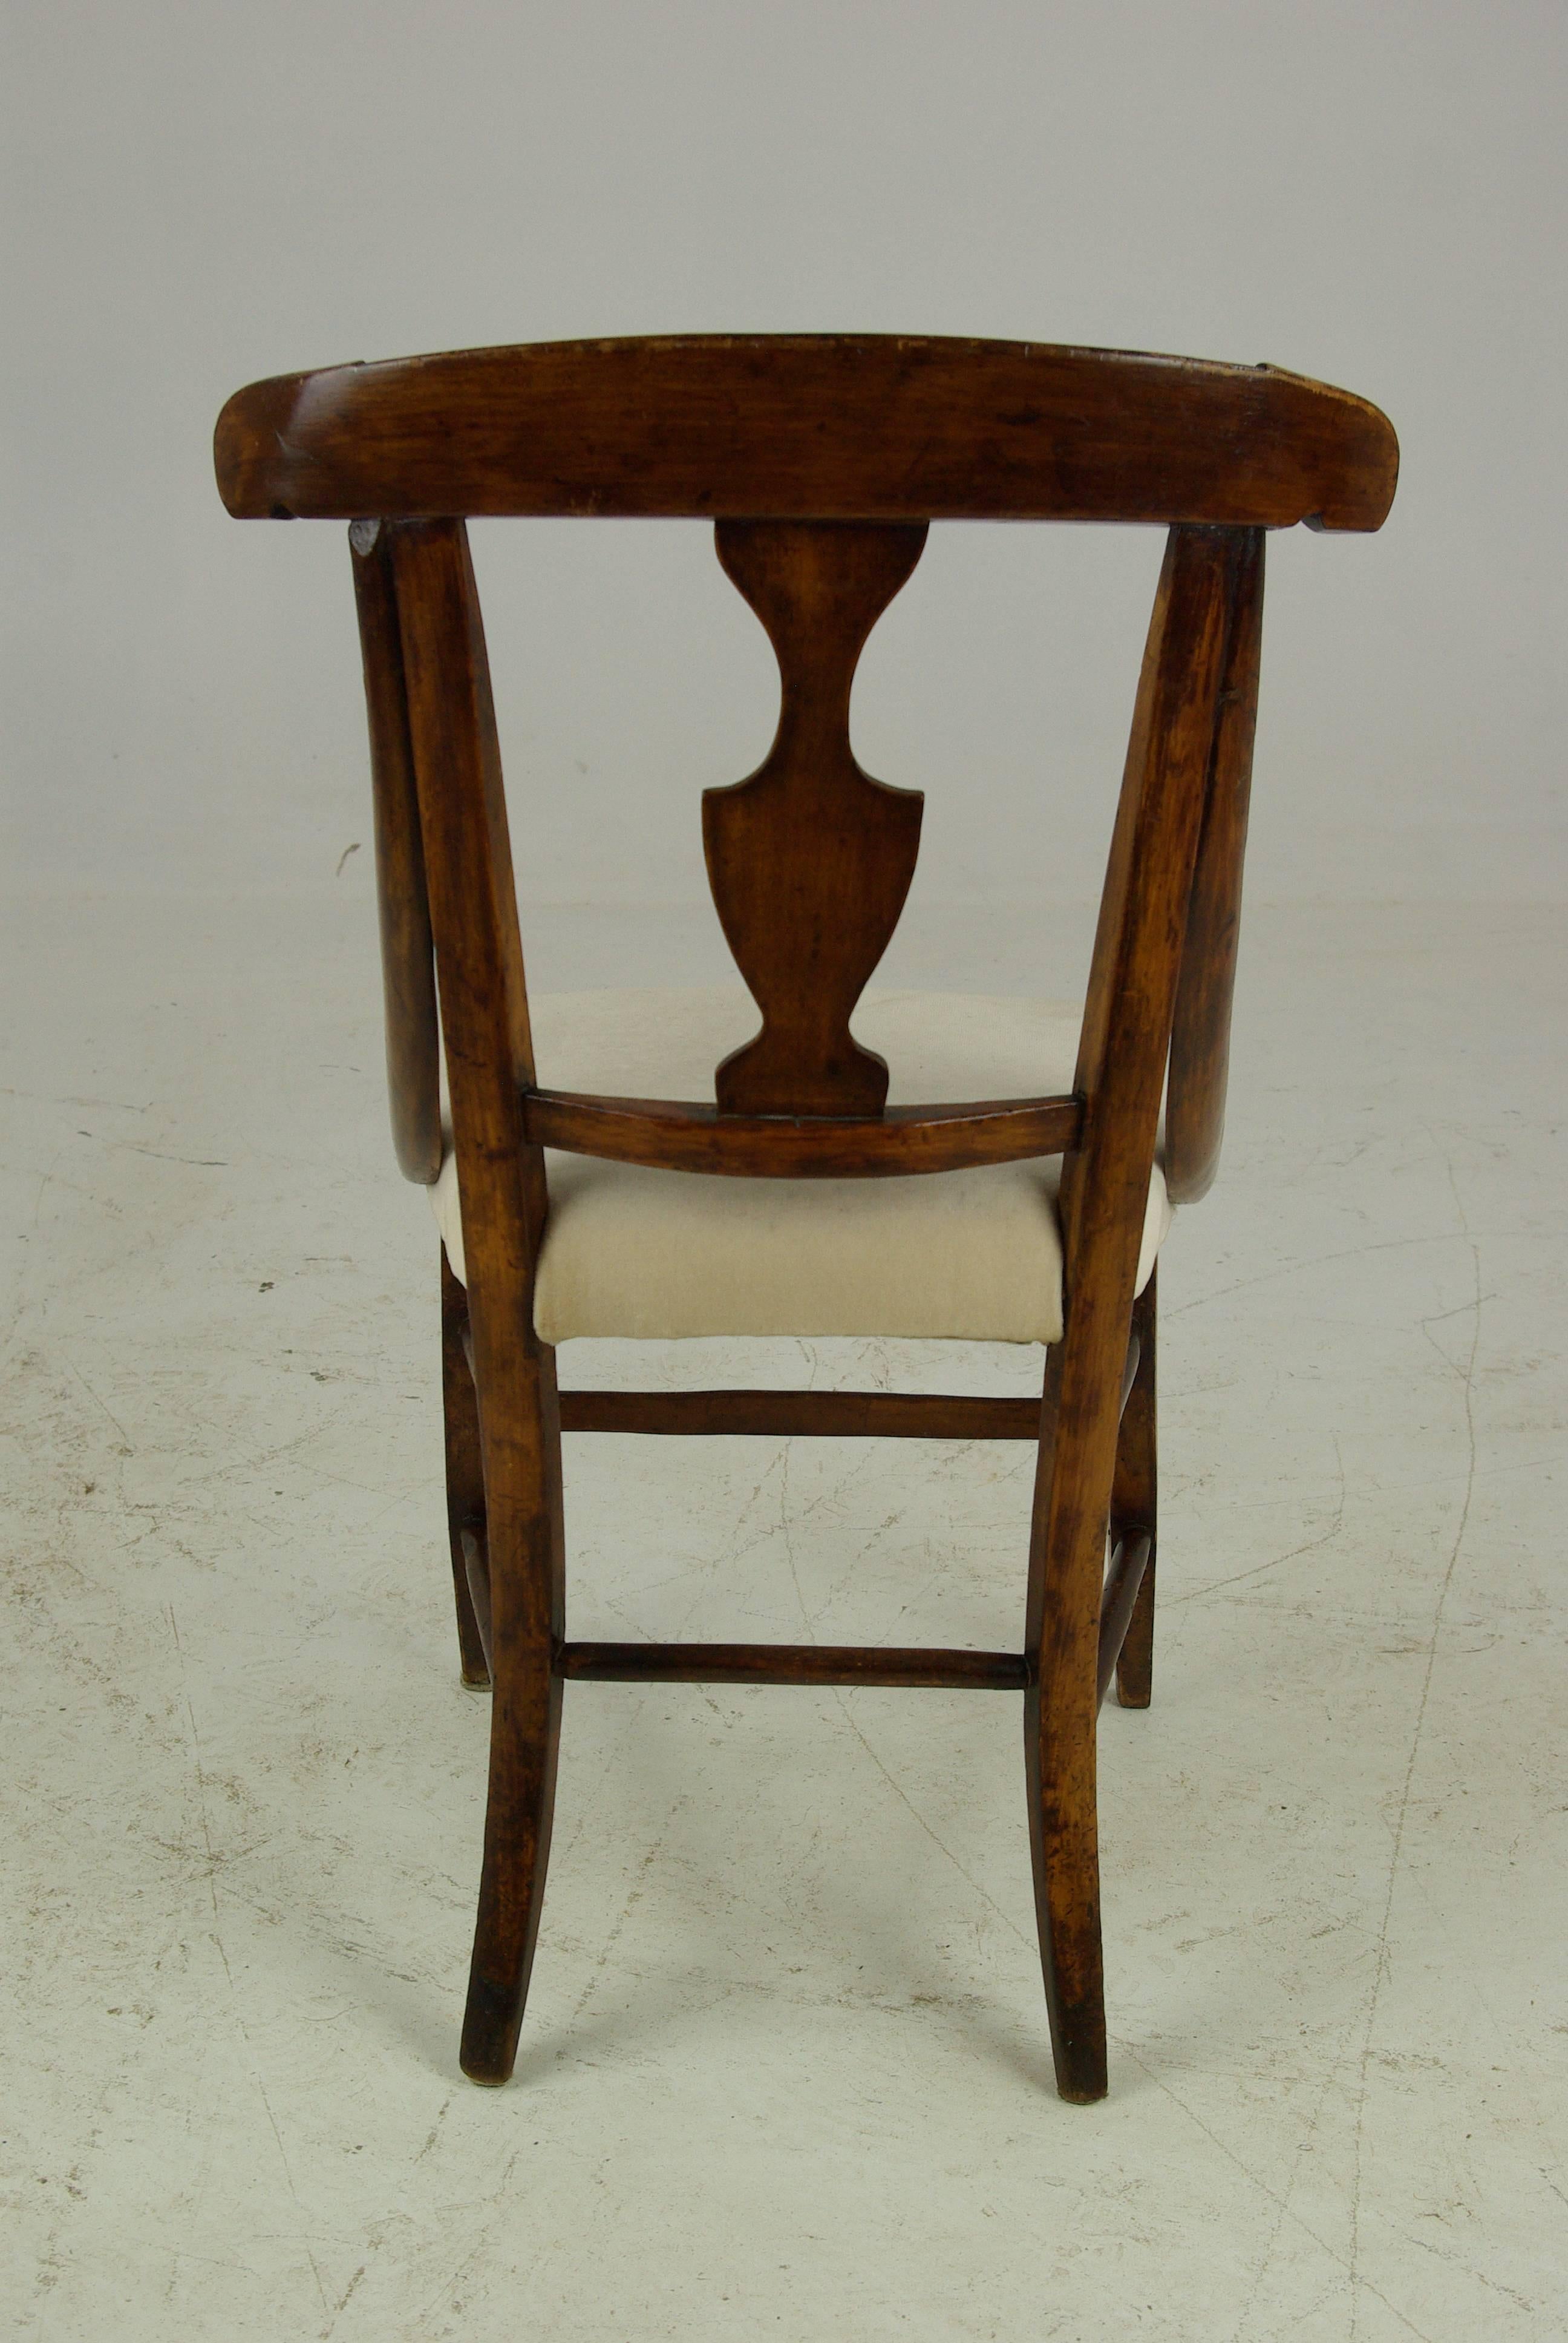 Antique dolls chair, childs chair, Victorian, Sycamore, Scotland 1880, B1140.

Scotland, 1880.
Solid sycamore wood
Curved top rail
Central shaped slat
Upholstered seat
Curved front and back legs
Untied by six stretchers for support
Nice